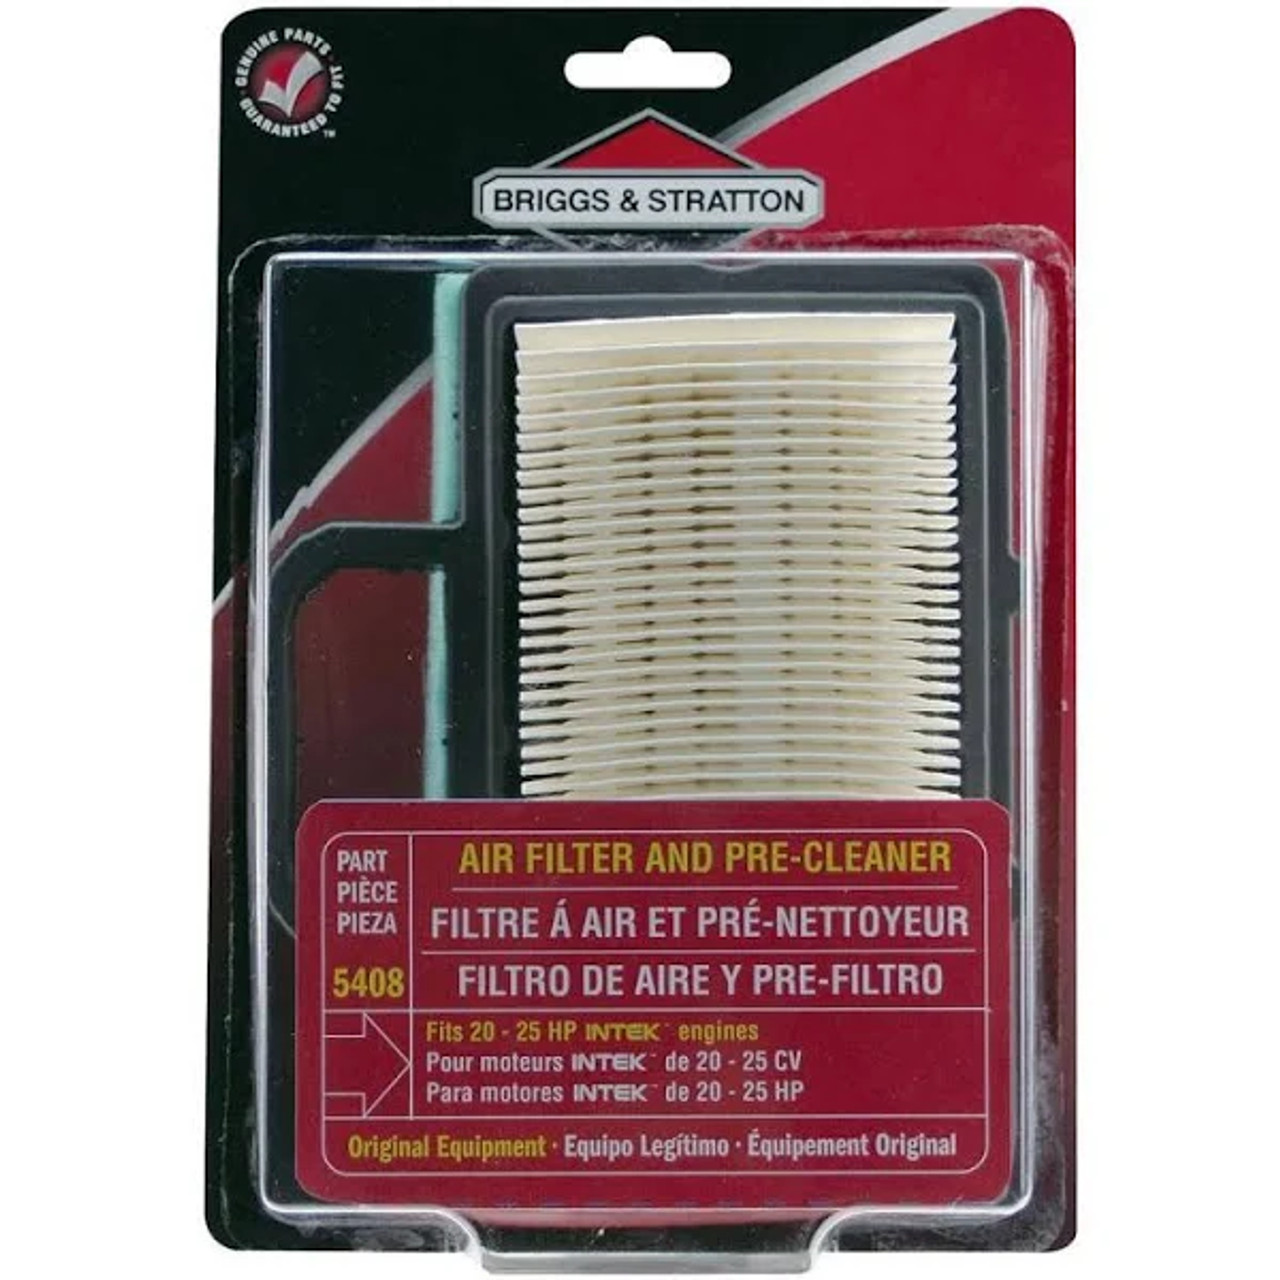 Replaces Briggs and Stratton Service Part #792101 (Air Filter) and #273638S (Pre-Cleaner)
For 16 through 27 Horsepower Intek V-twin Engines
Genuine Briggs and Stratton Part